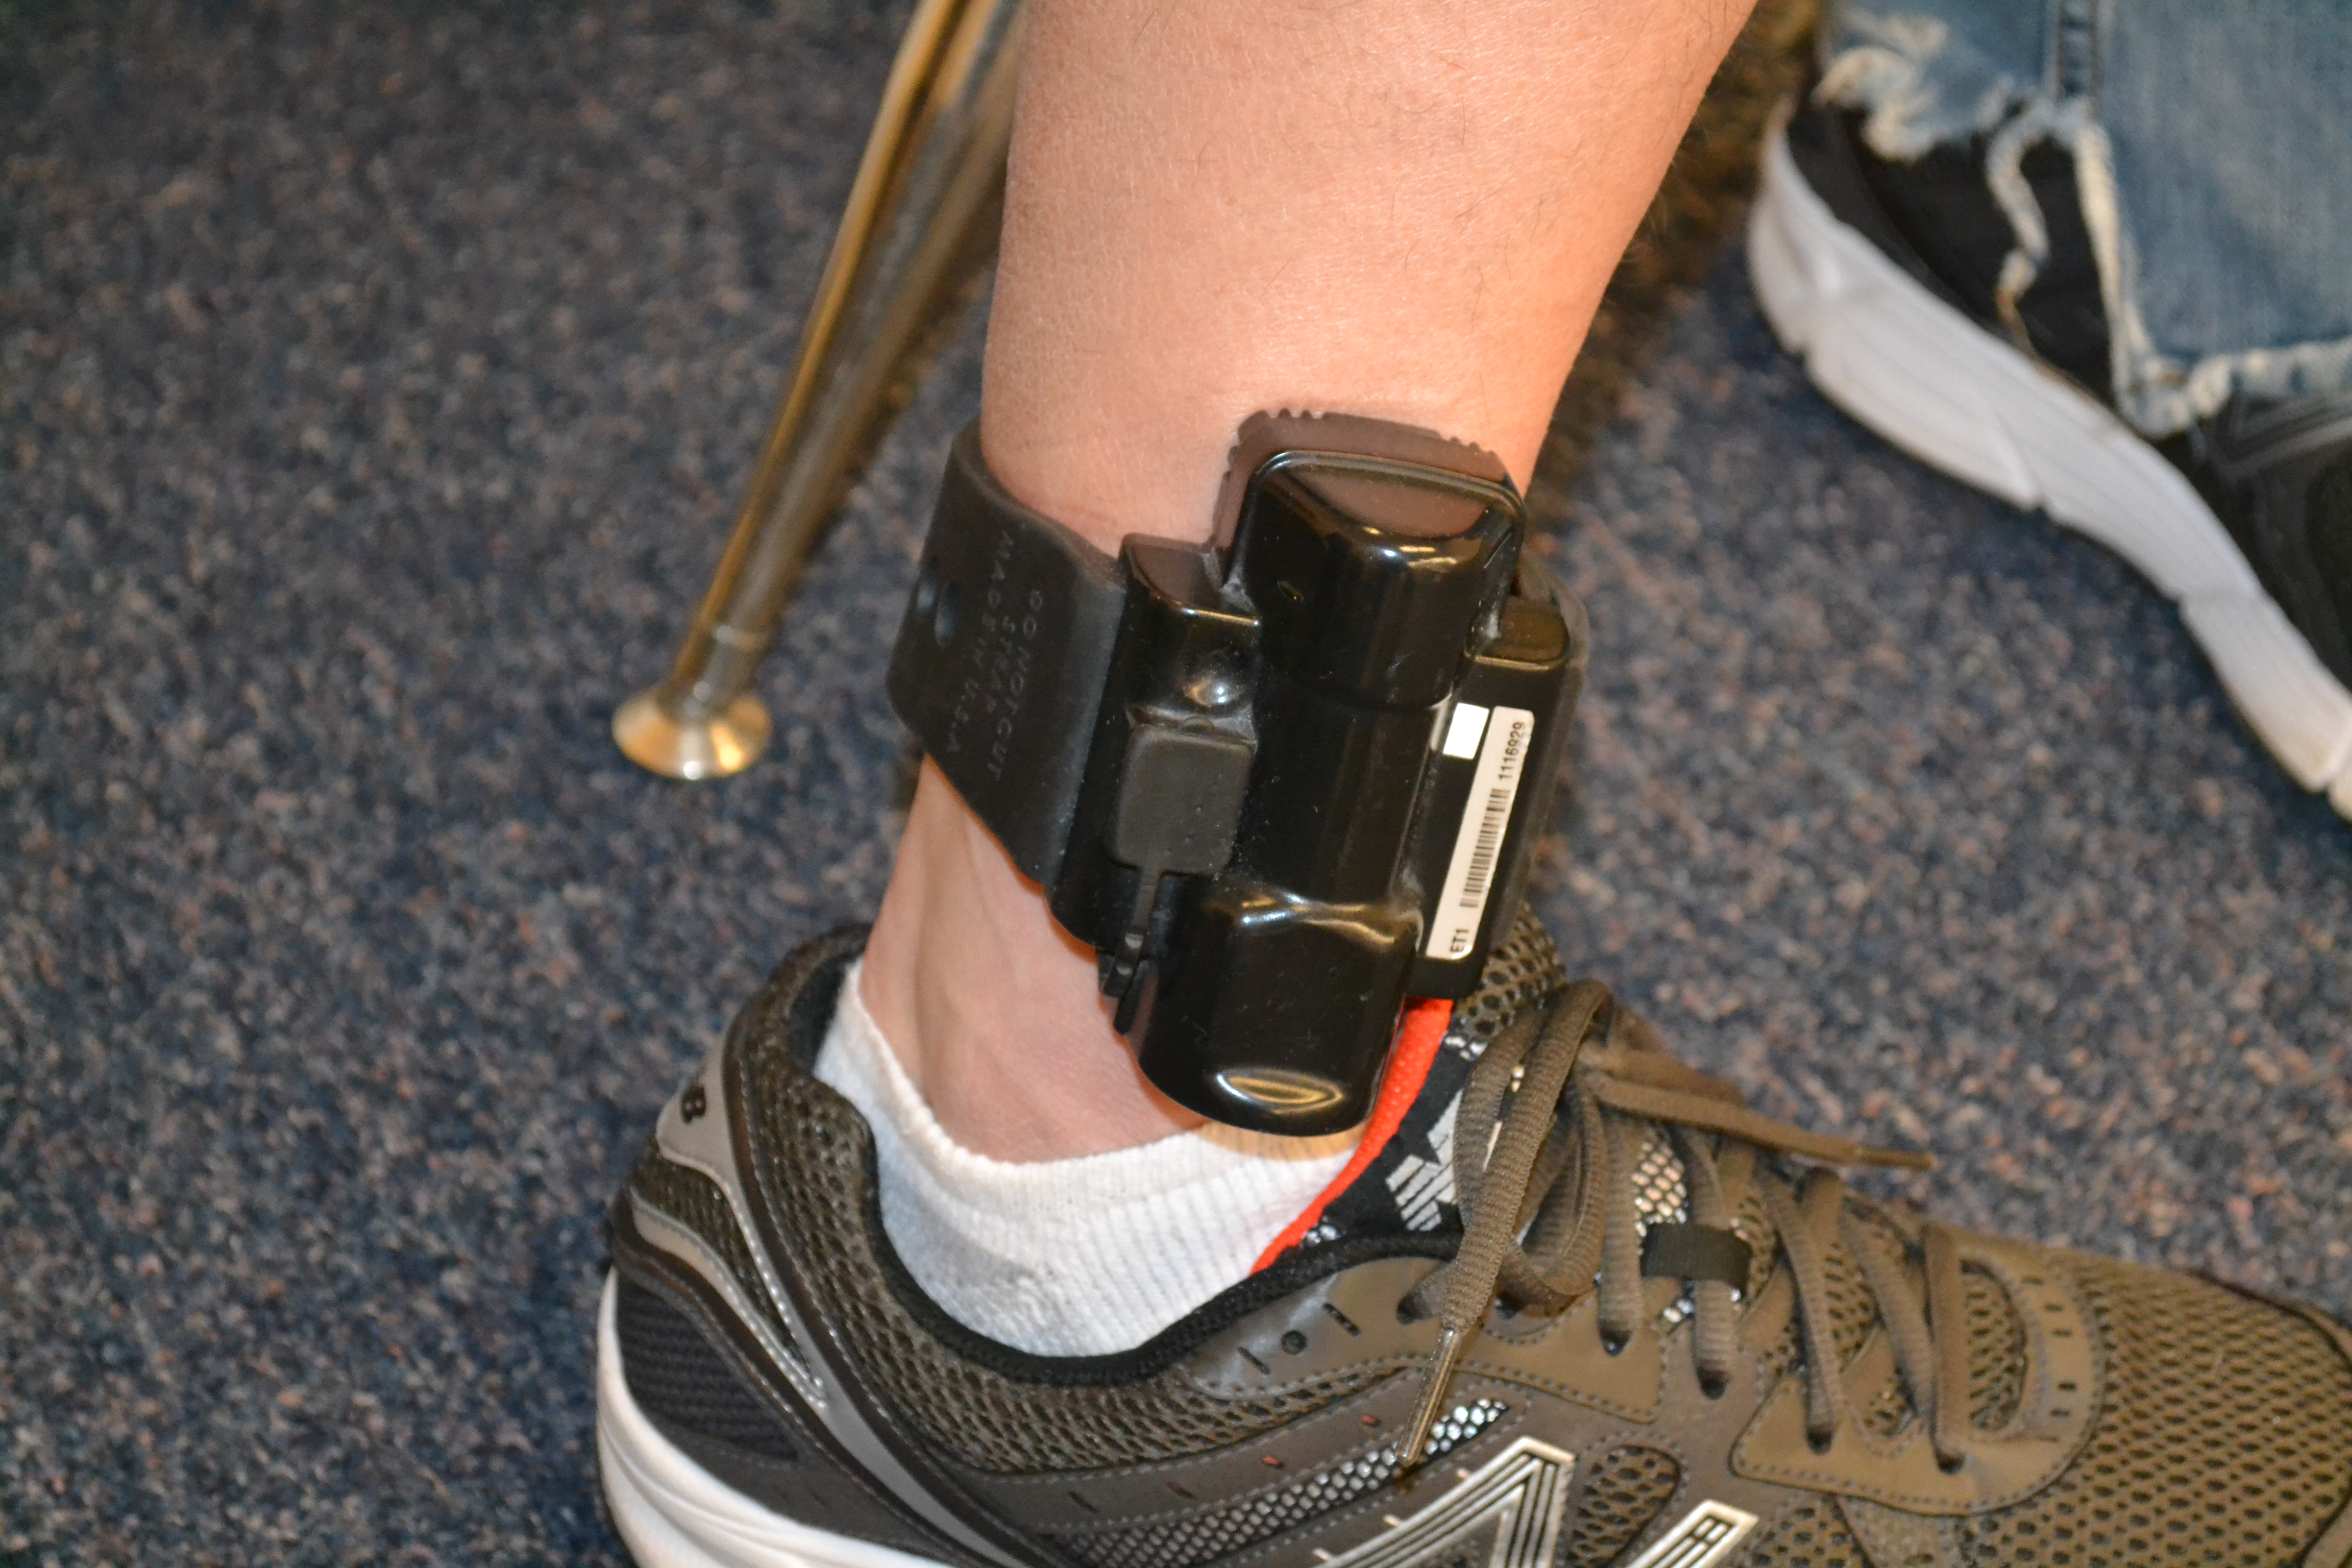 How Do Ankle Monitors Work?